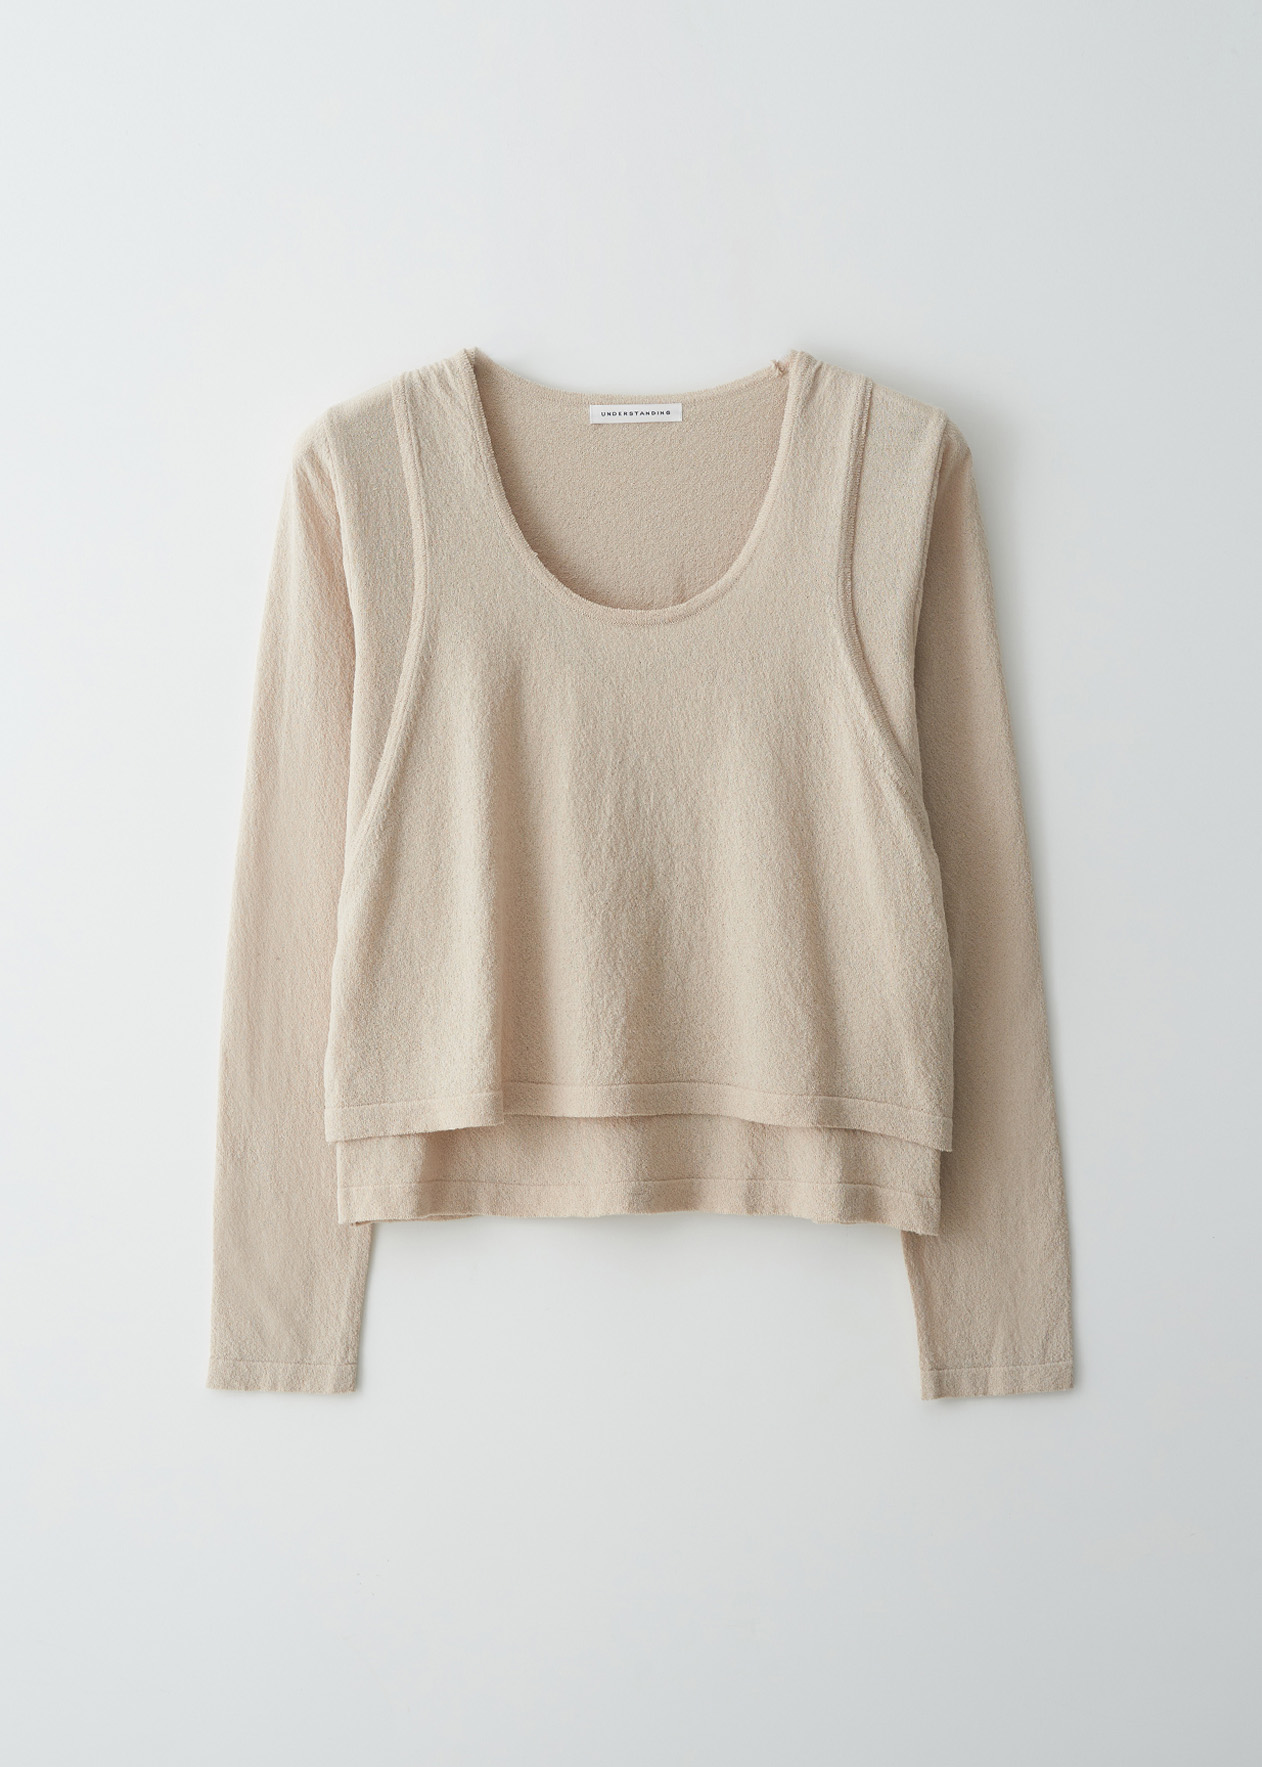 SALE_Double-layered knit